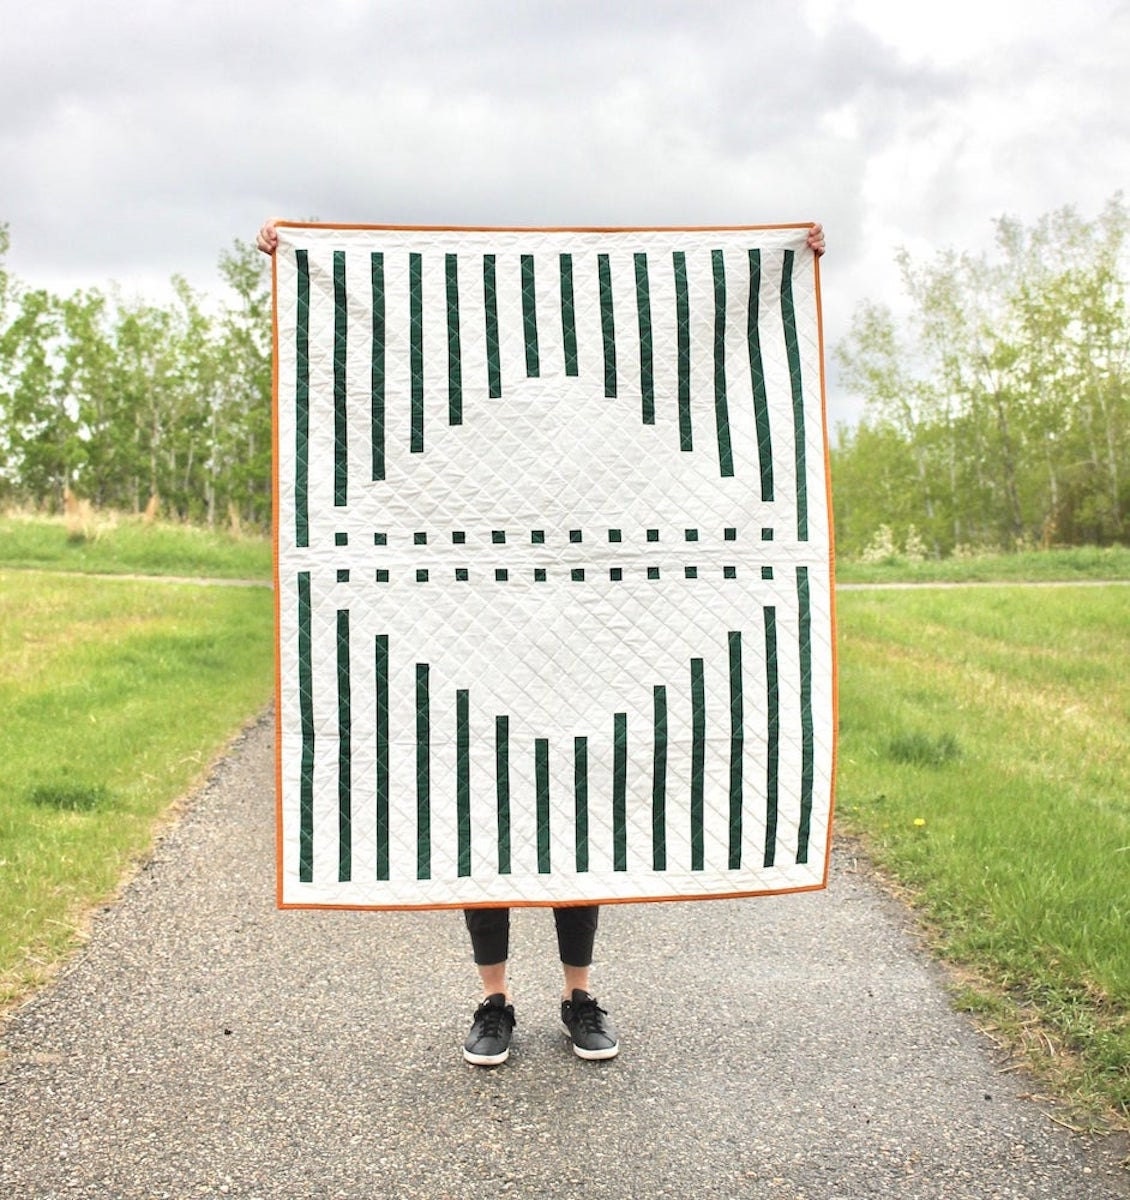 Minimalist quilt pattern from Etsy